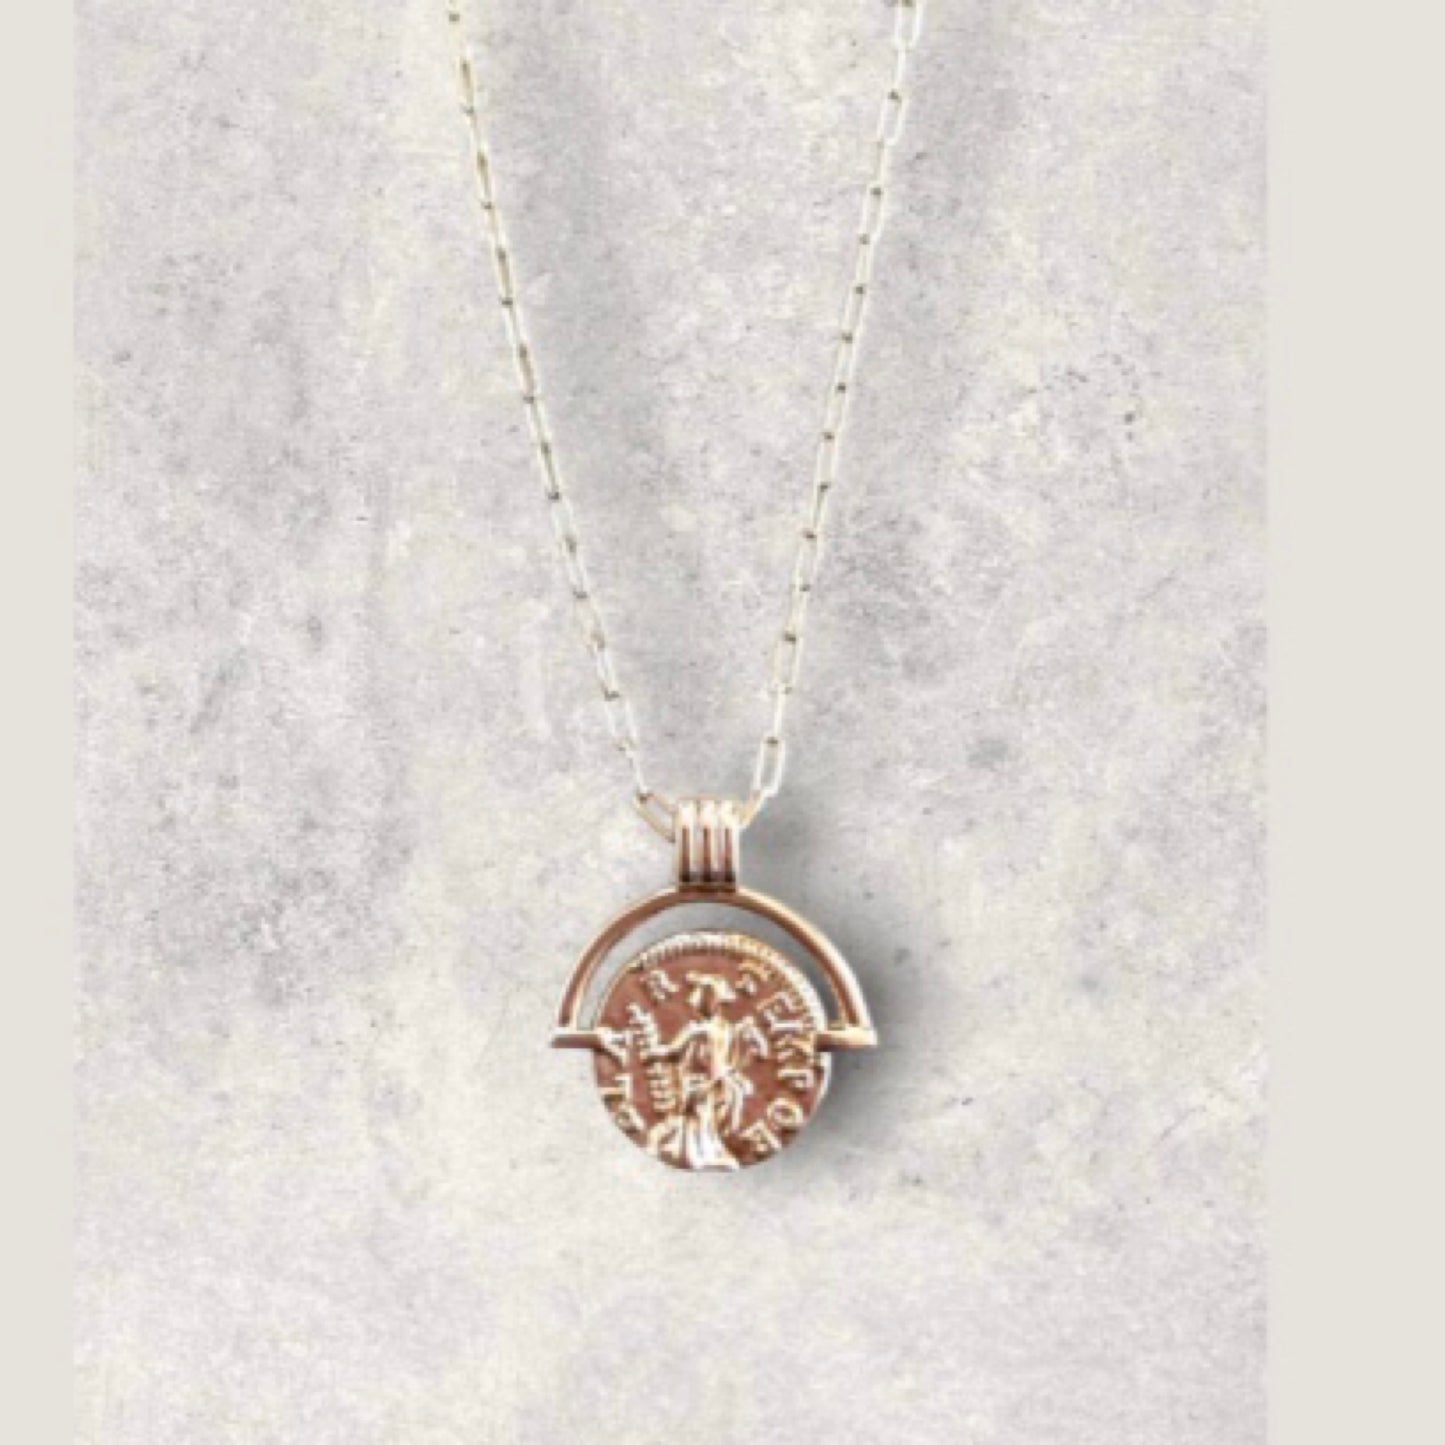 Lock + Loring Delilah Coin Necklace